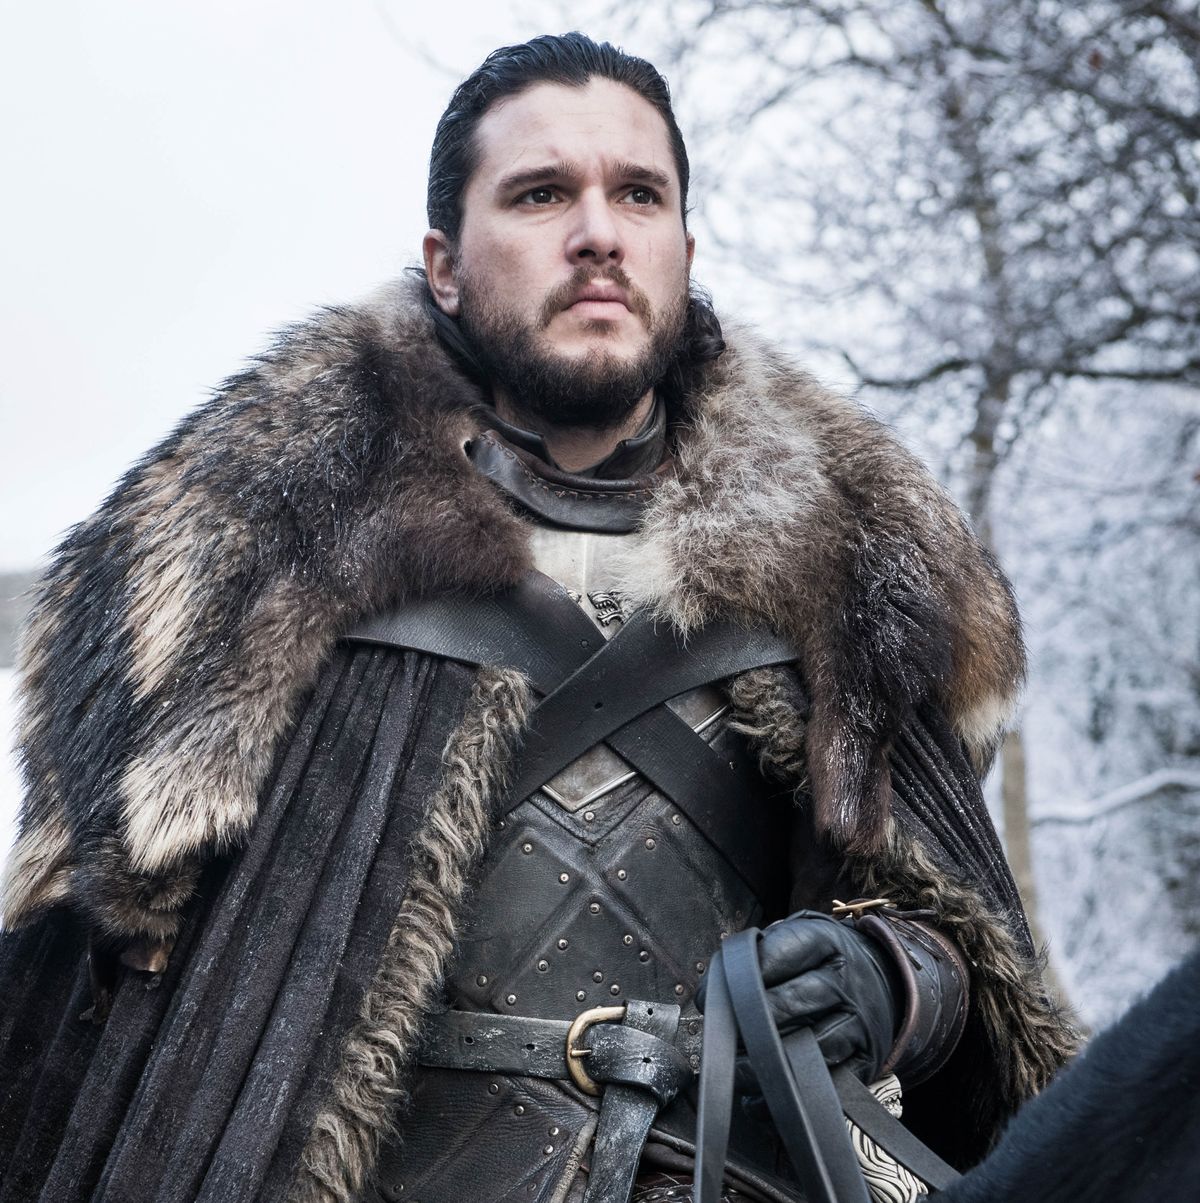 Jon Snow Is the Hottest Gaмe of Thrones Character - Hot People in GoT